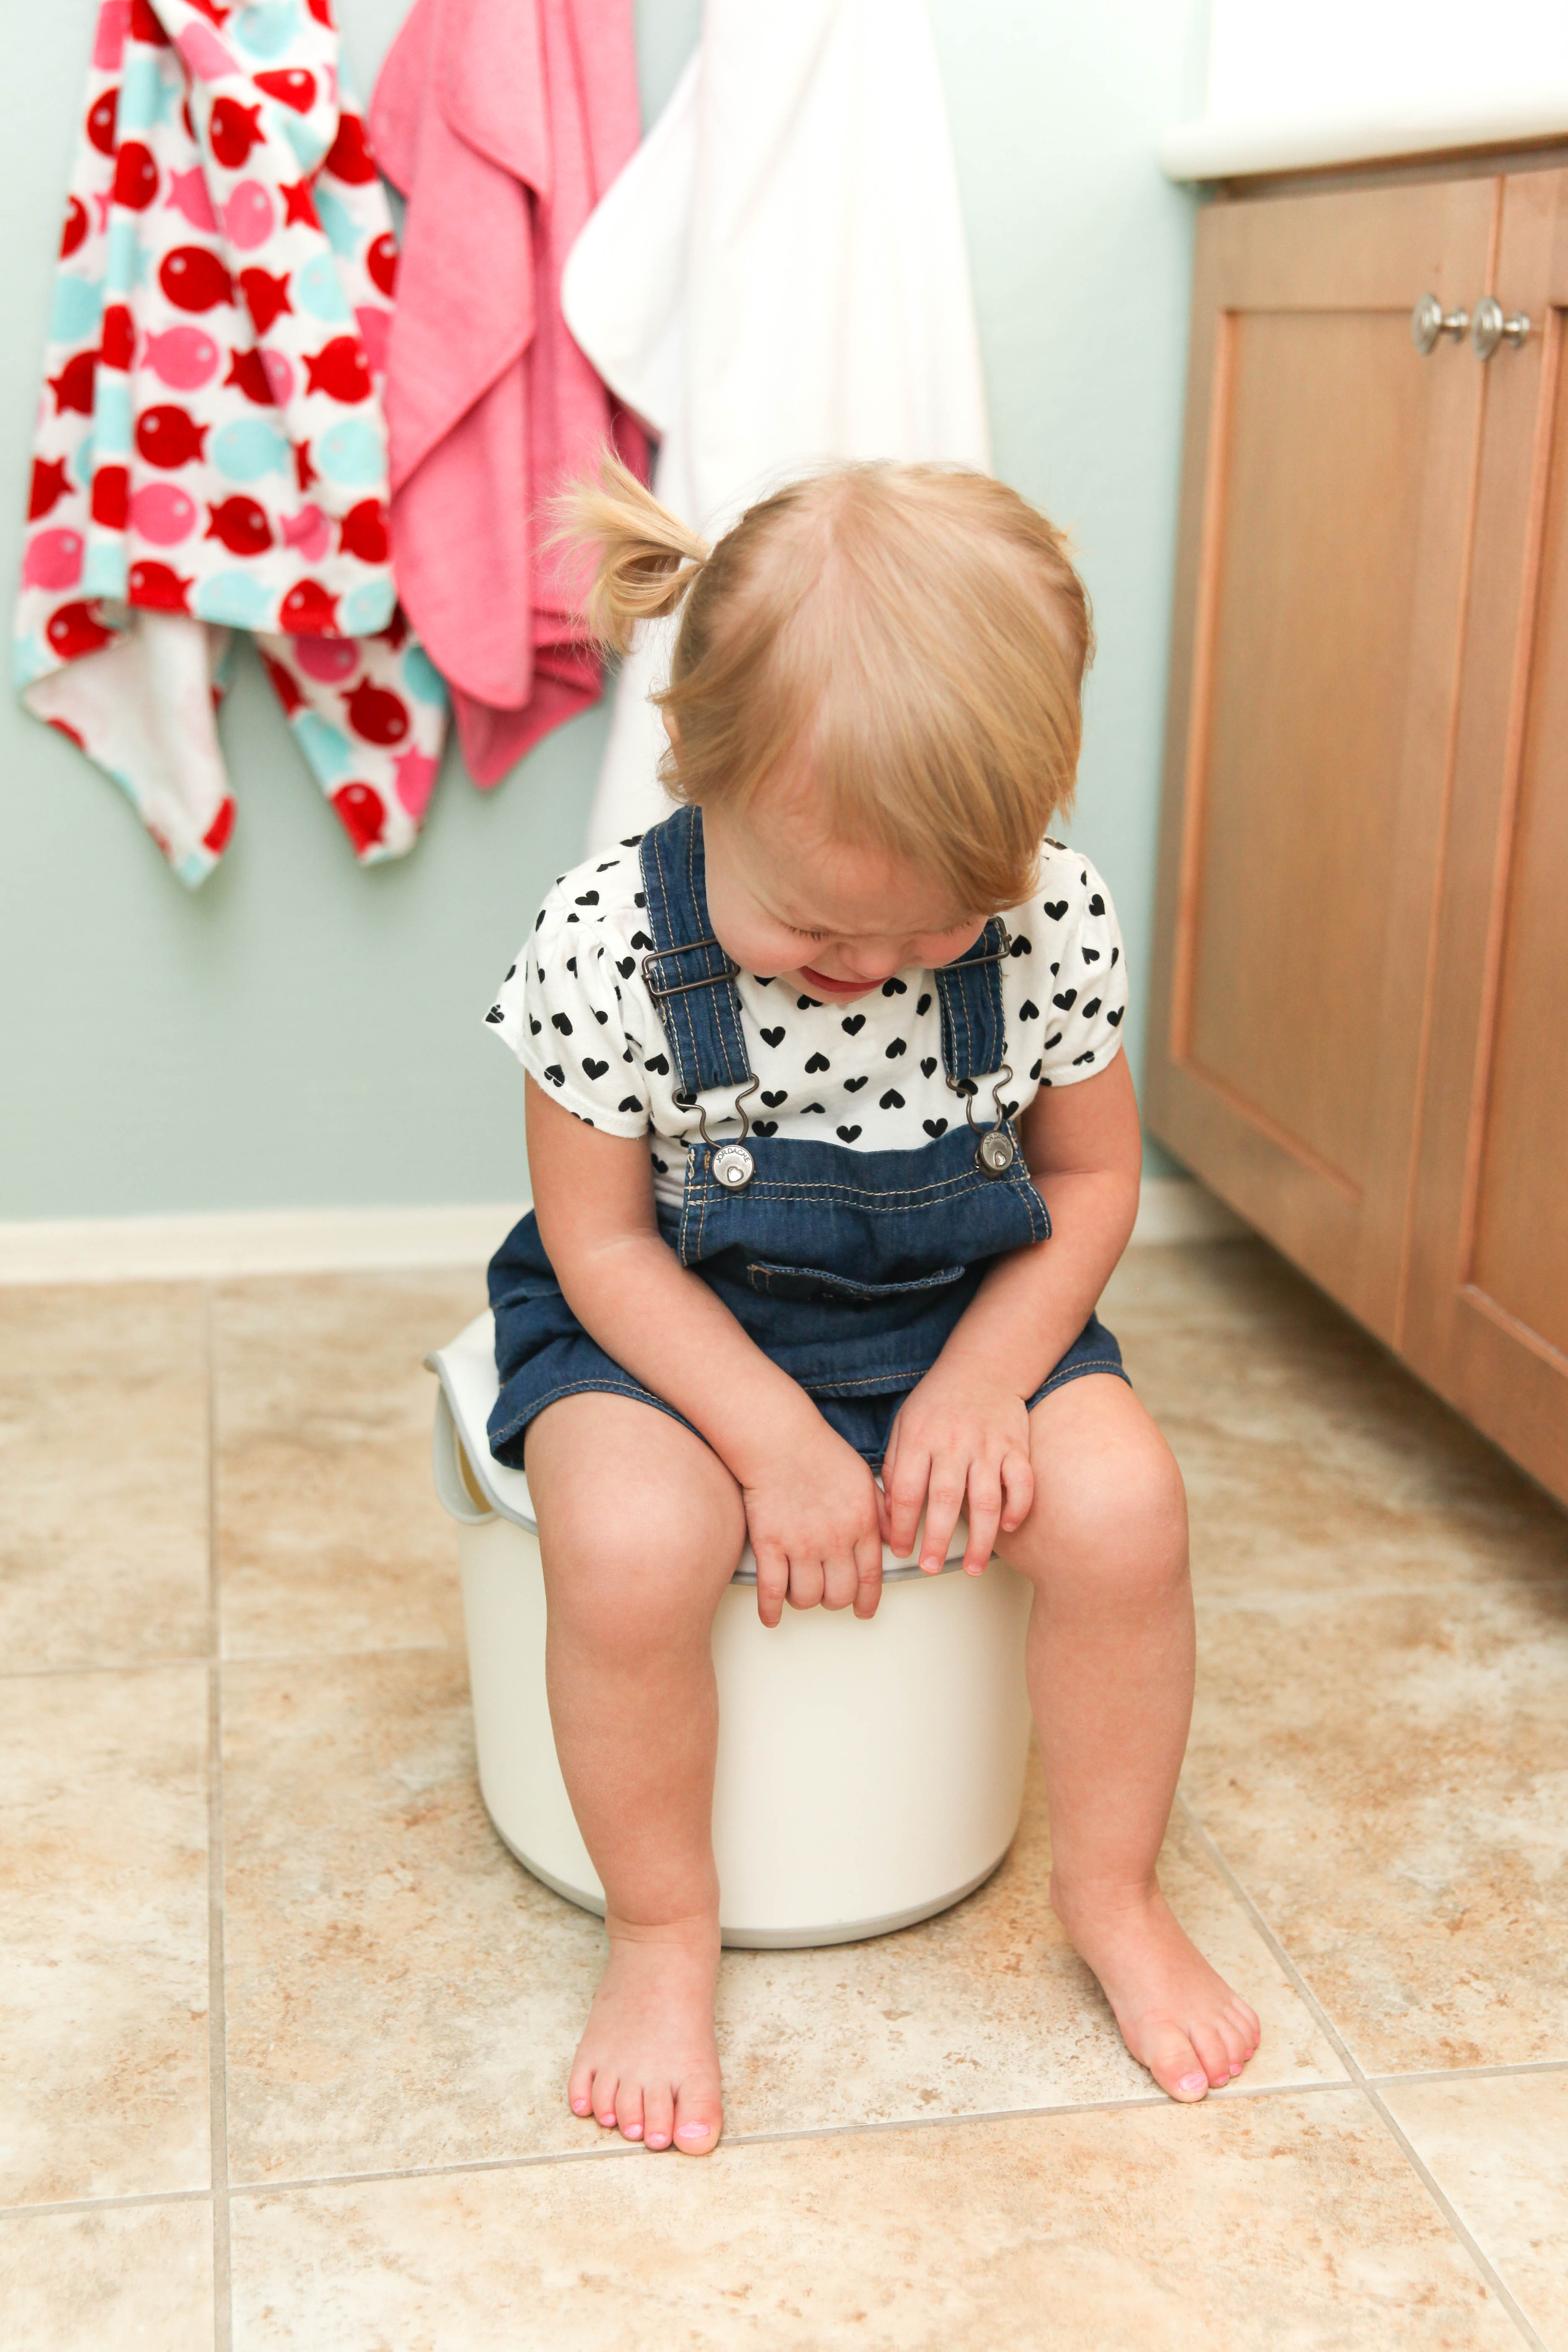 3-in-1 Potty from Ubbi